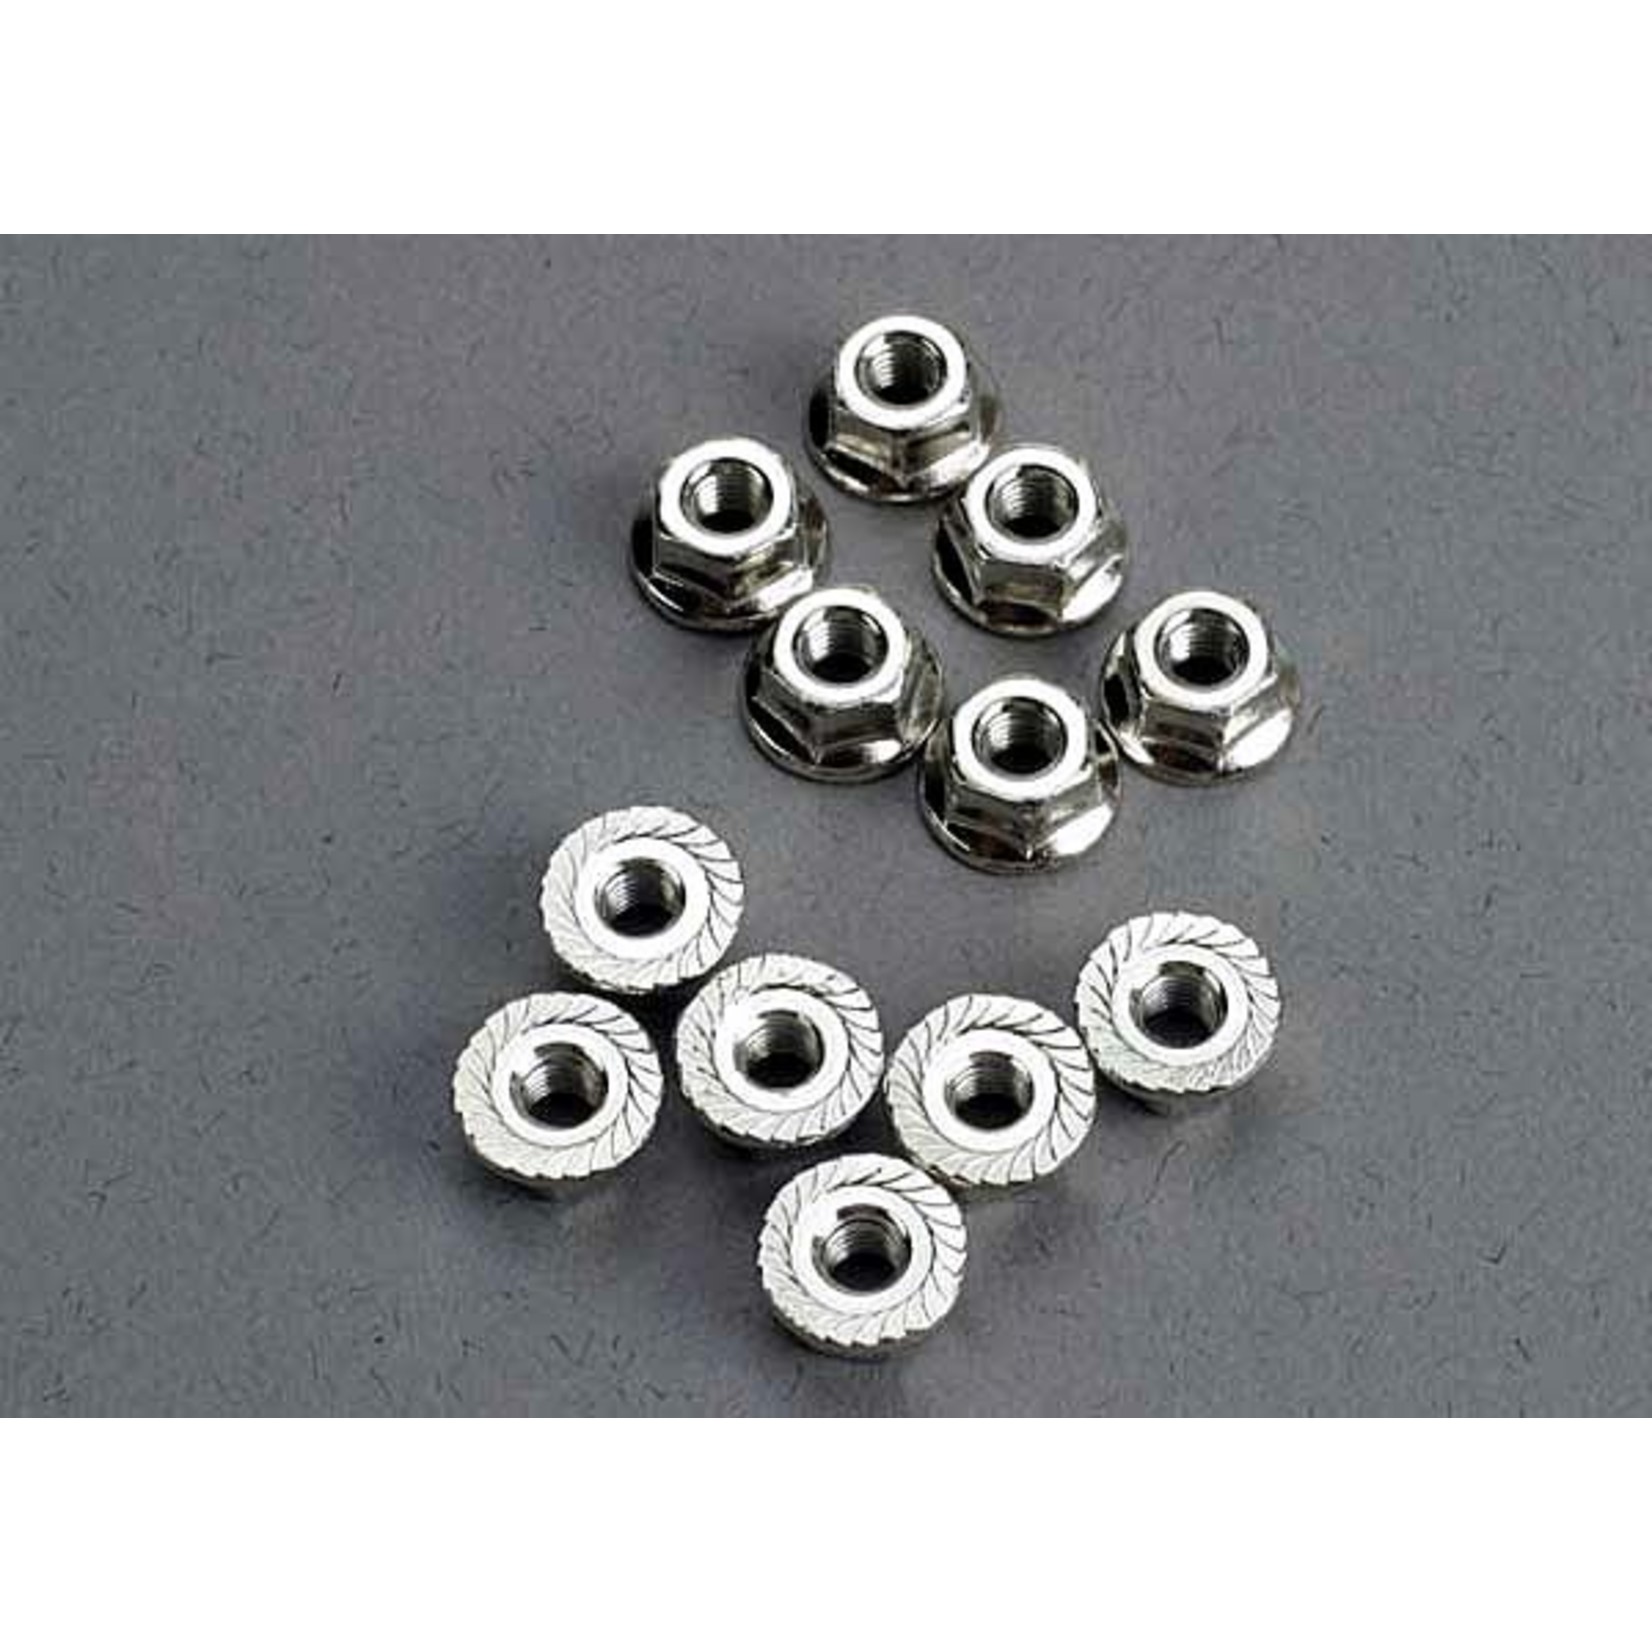 Traxxas 2744 - Nuts, 3mm flanged (12)